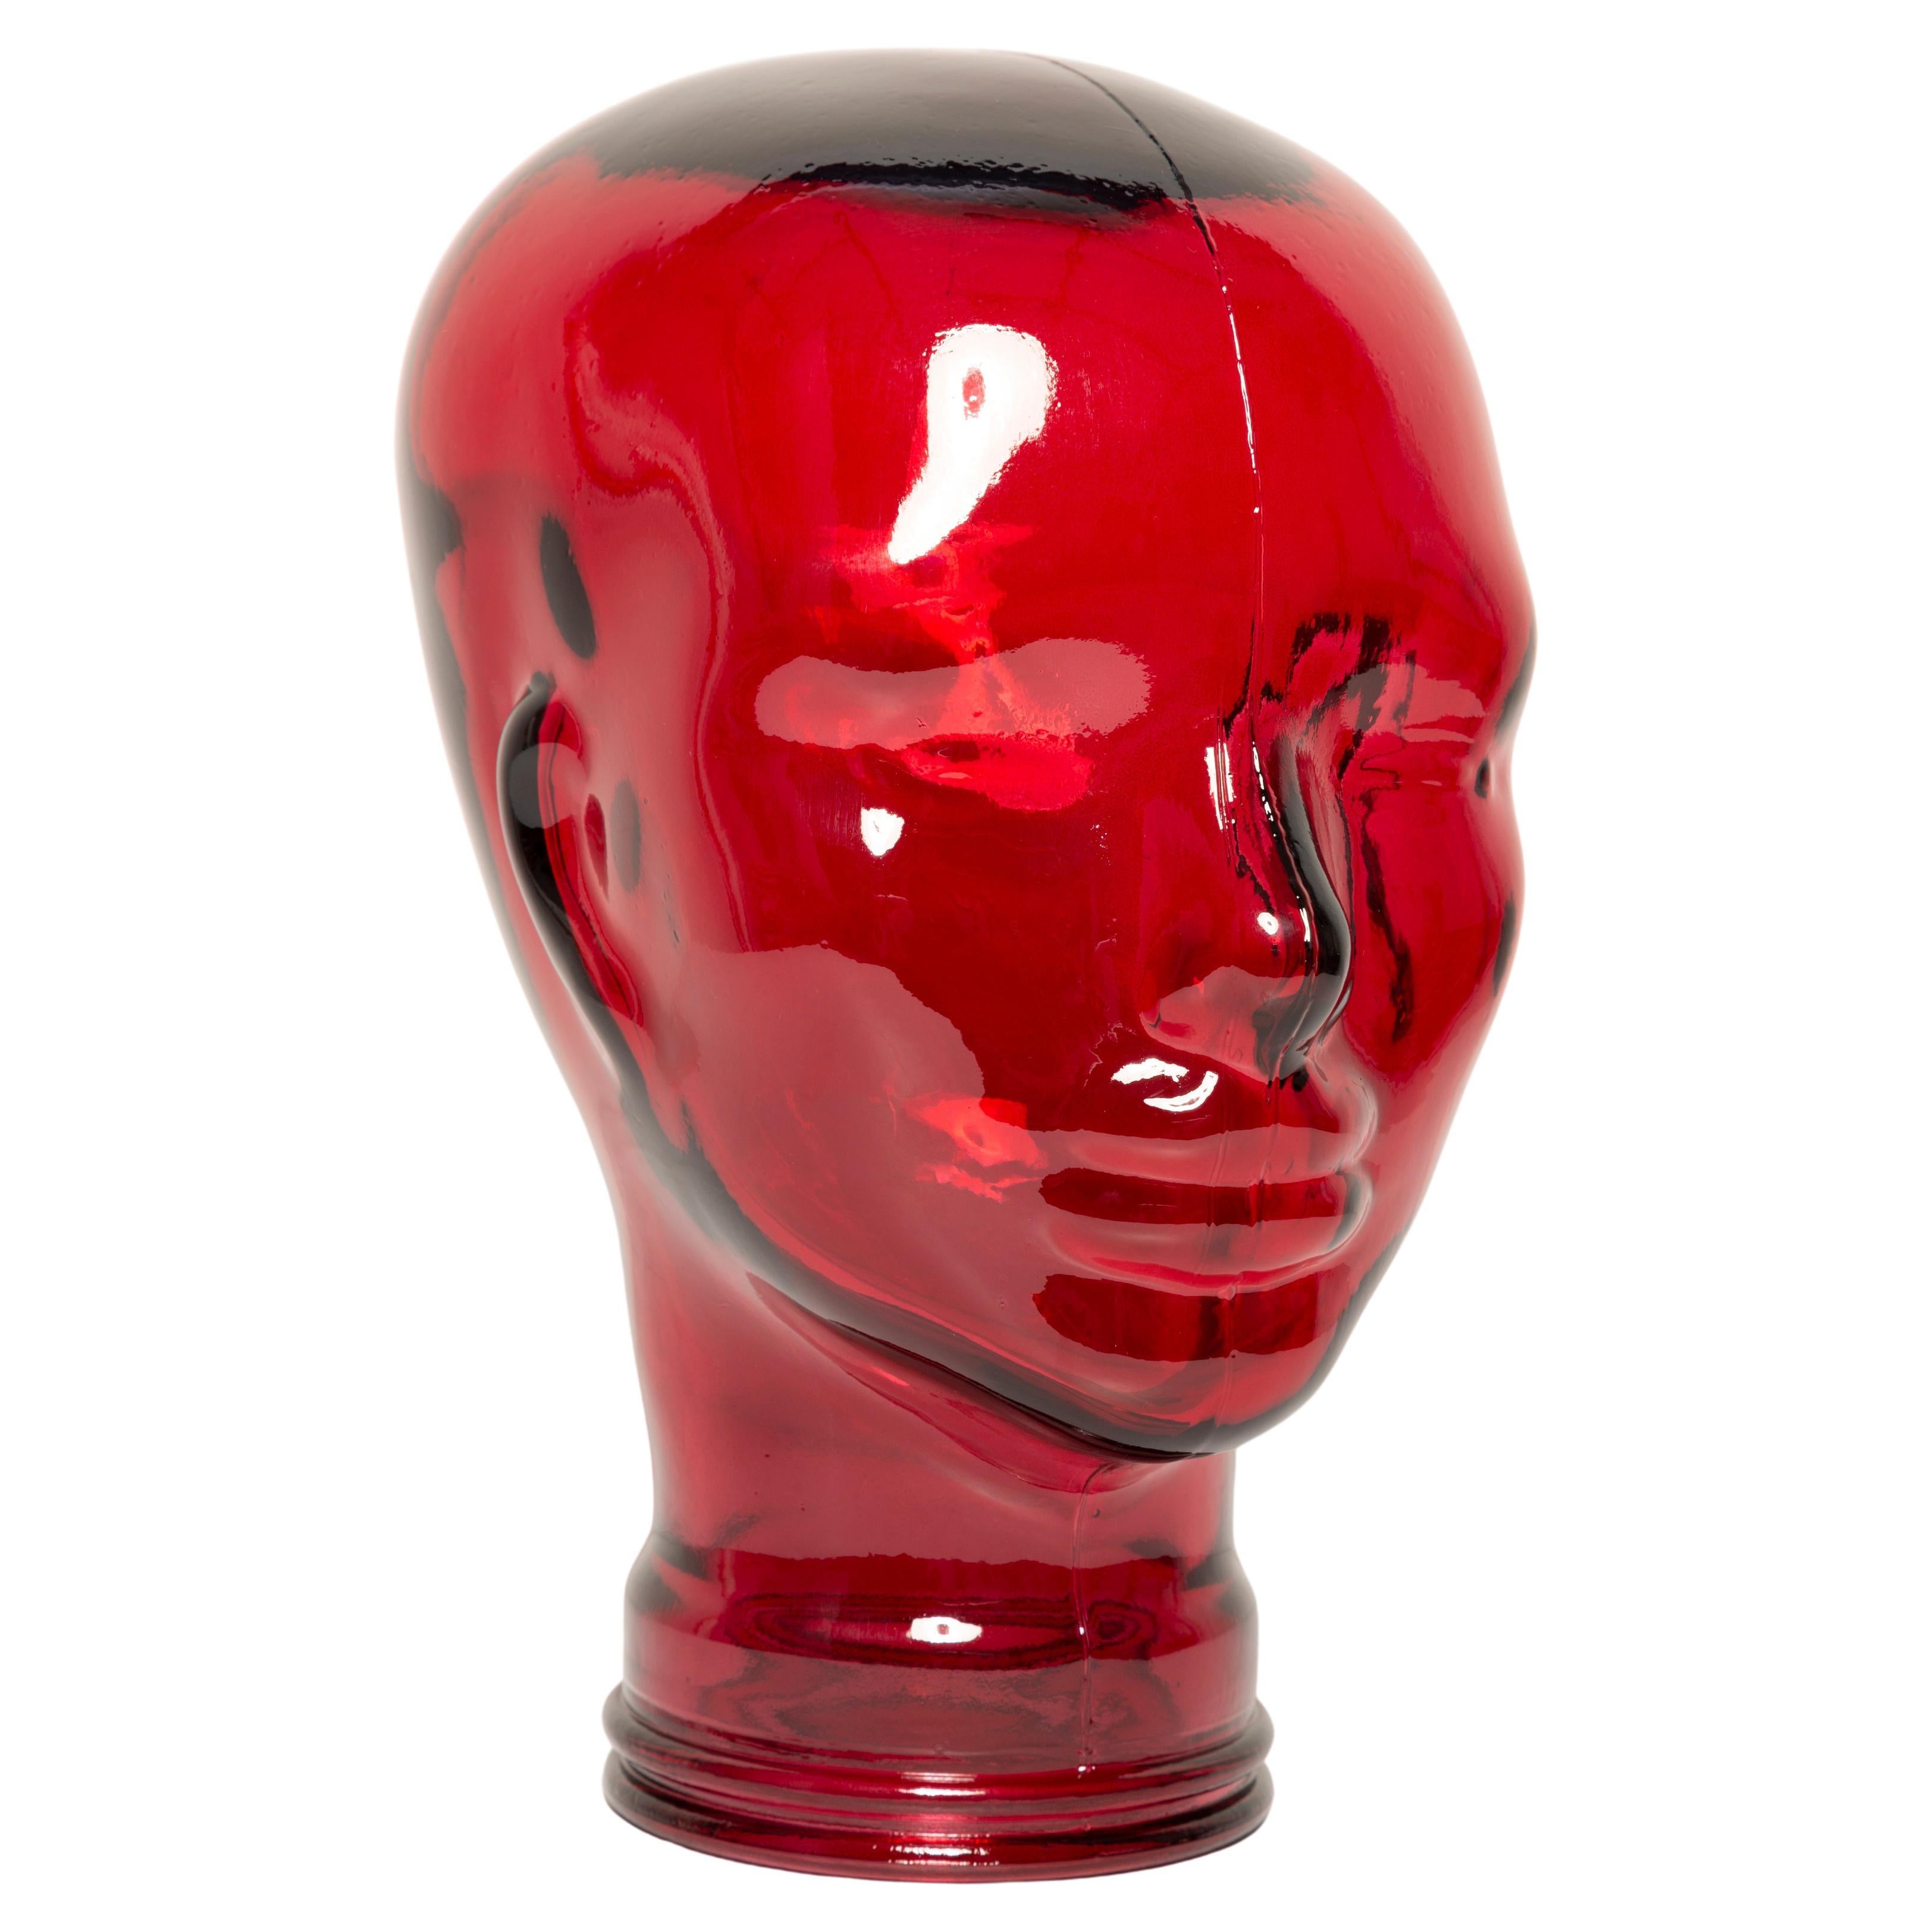 Red Vintage Decorative Mannequin Glass Head Sculpture, 1970s, Germany